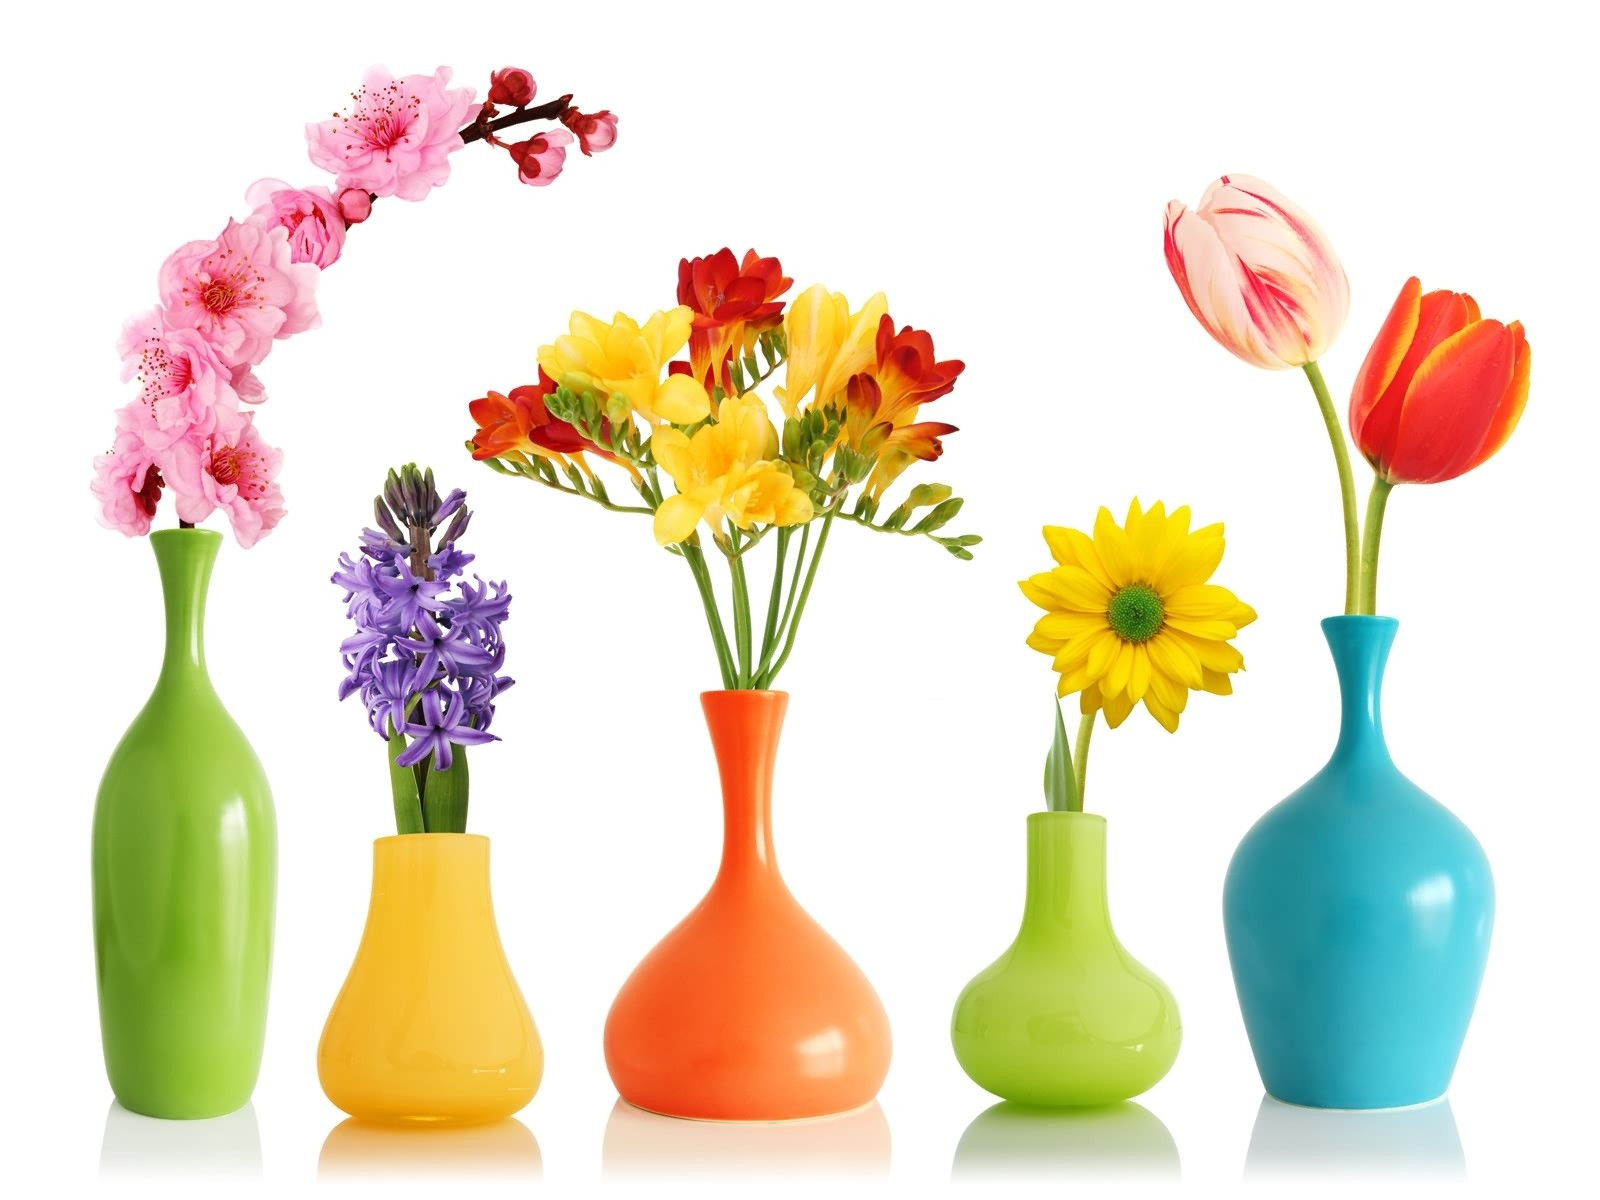 19 Lovable Modern Flower Vase Designs 2024 free download modern flower vase designs of vases design ideas unique vases with flowers drawings photo vase intended for modern brief dried vases with flowers colorful vase with flower simple orange gree